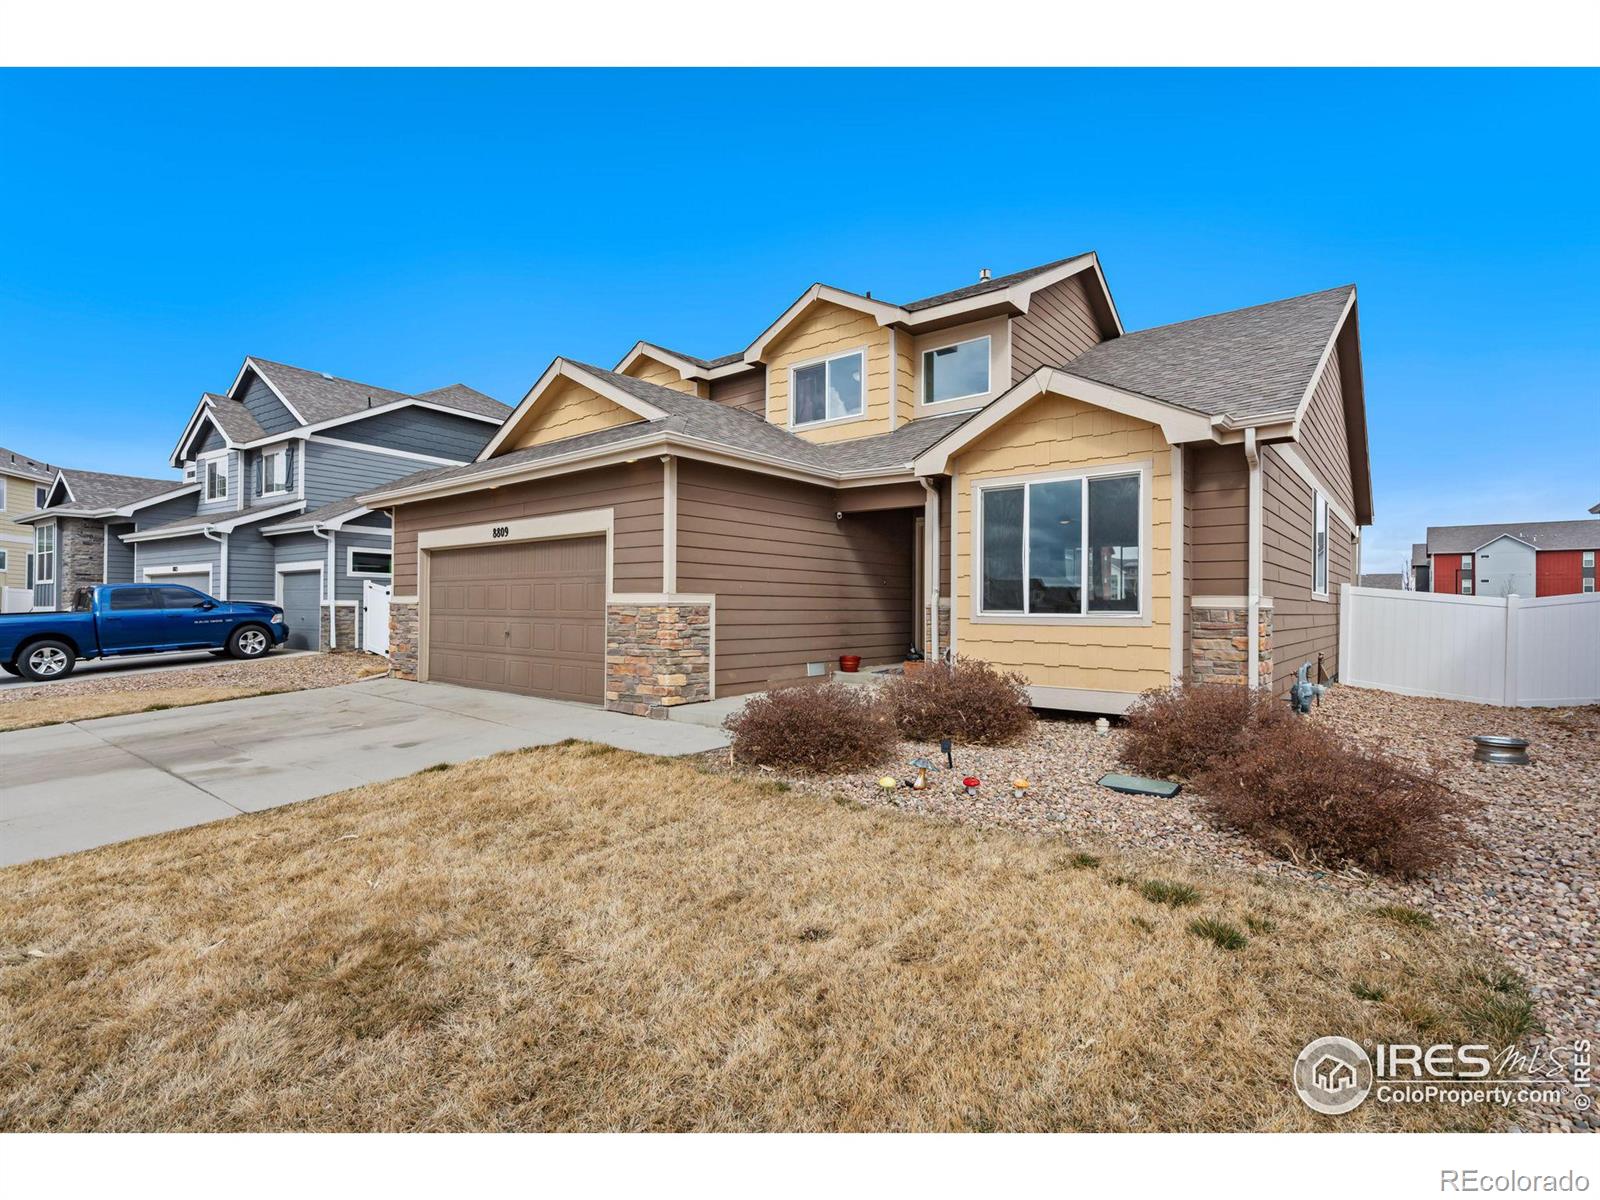 8809  13th street, Greeley sold home. Closed on 2024-04-29 for $435,000.